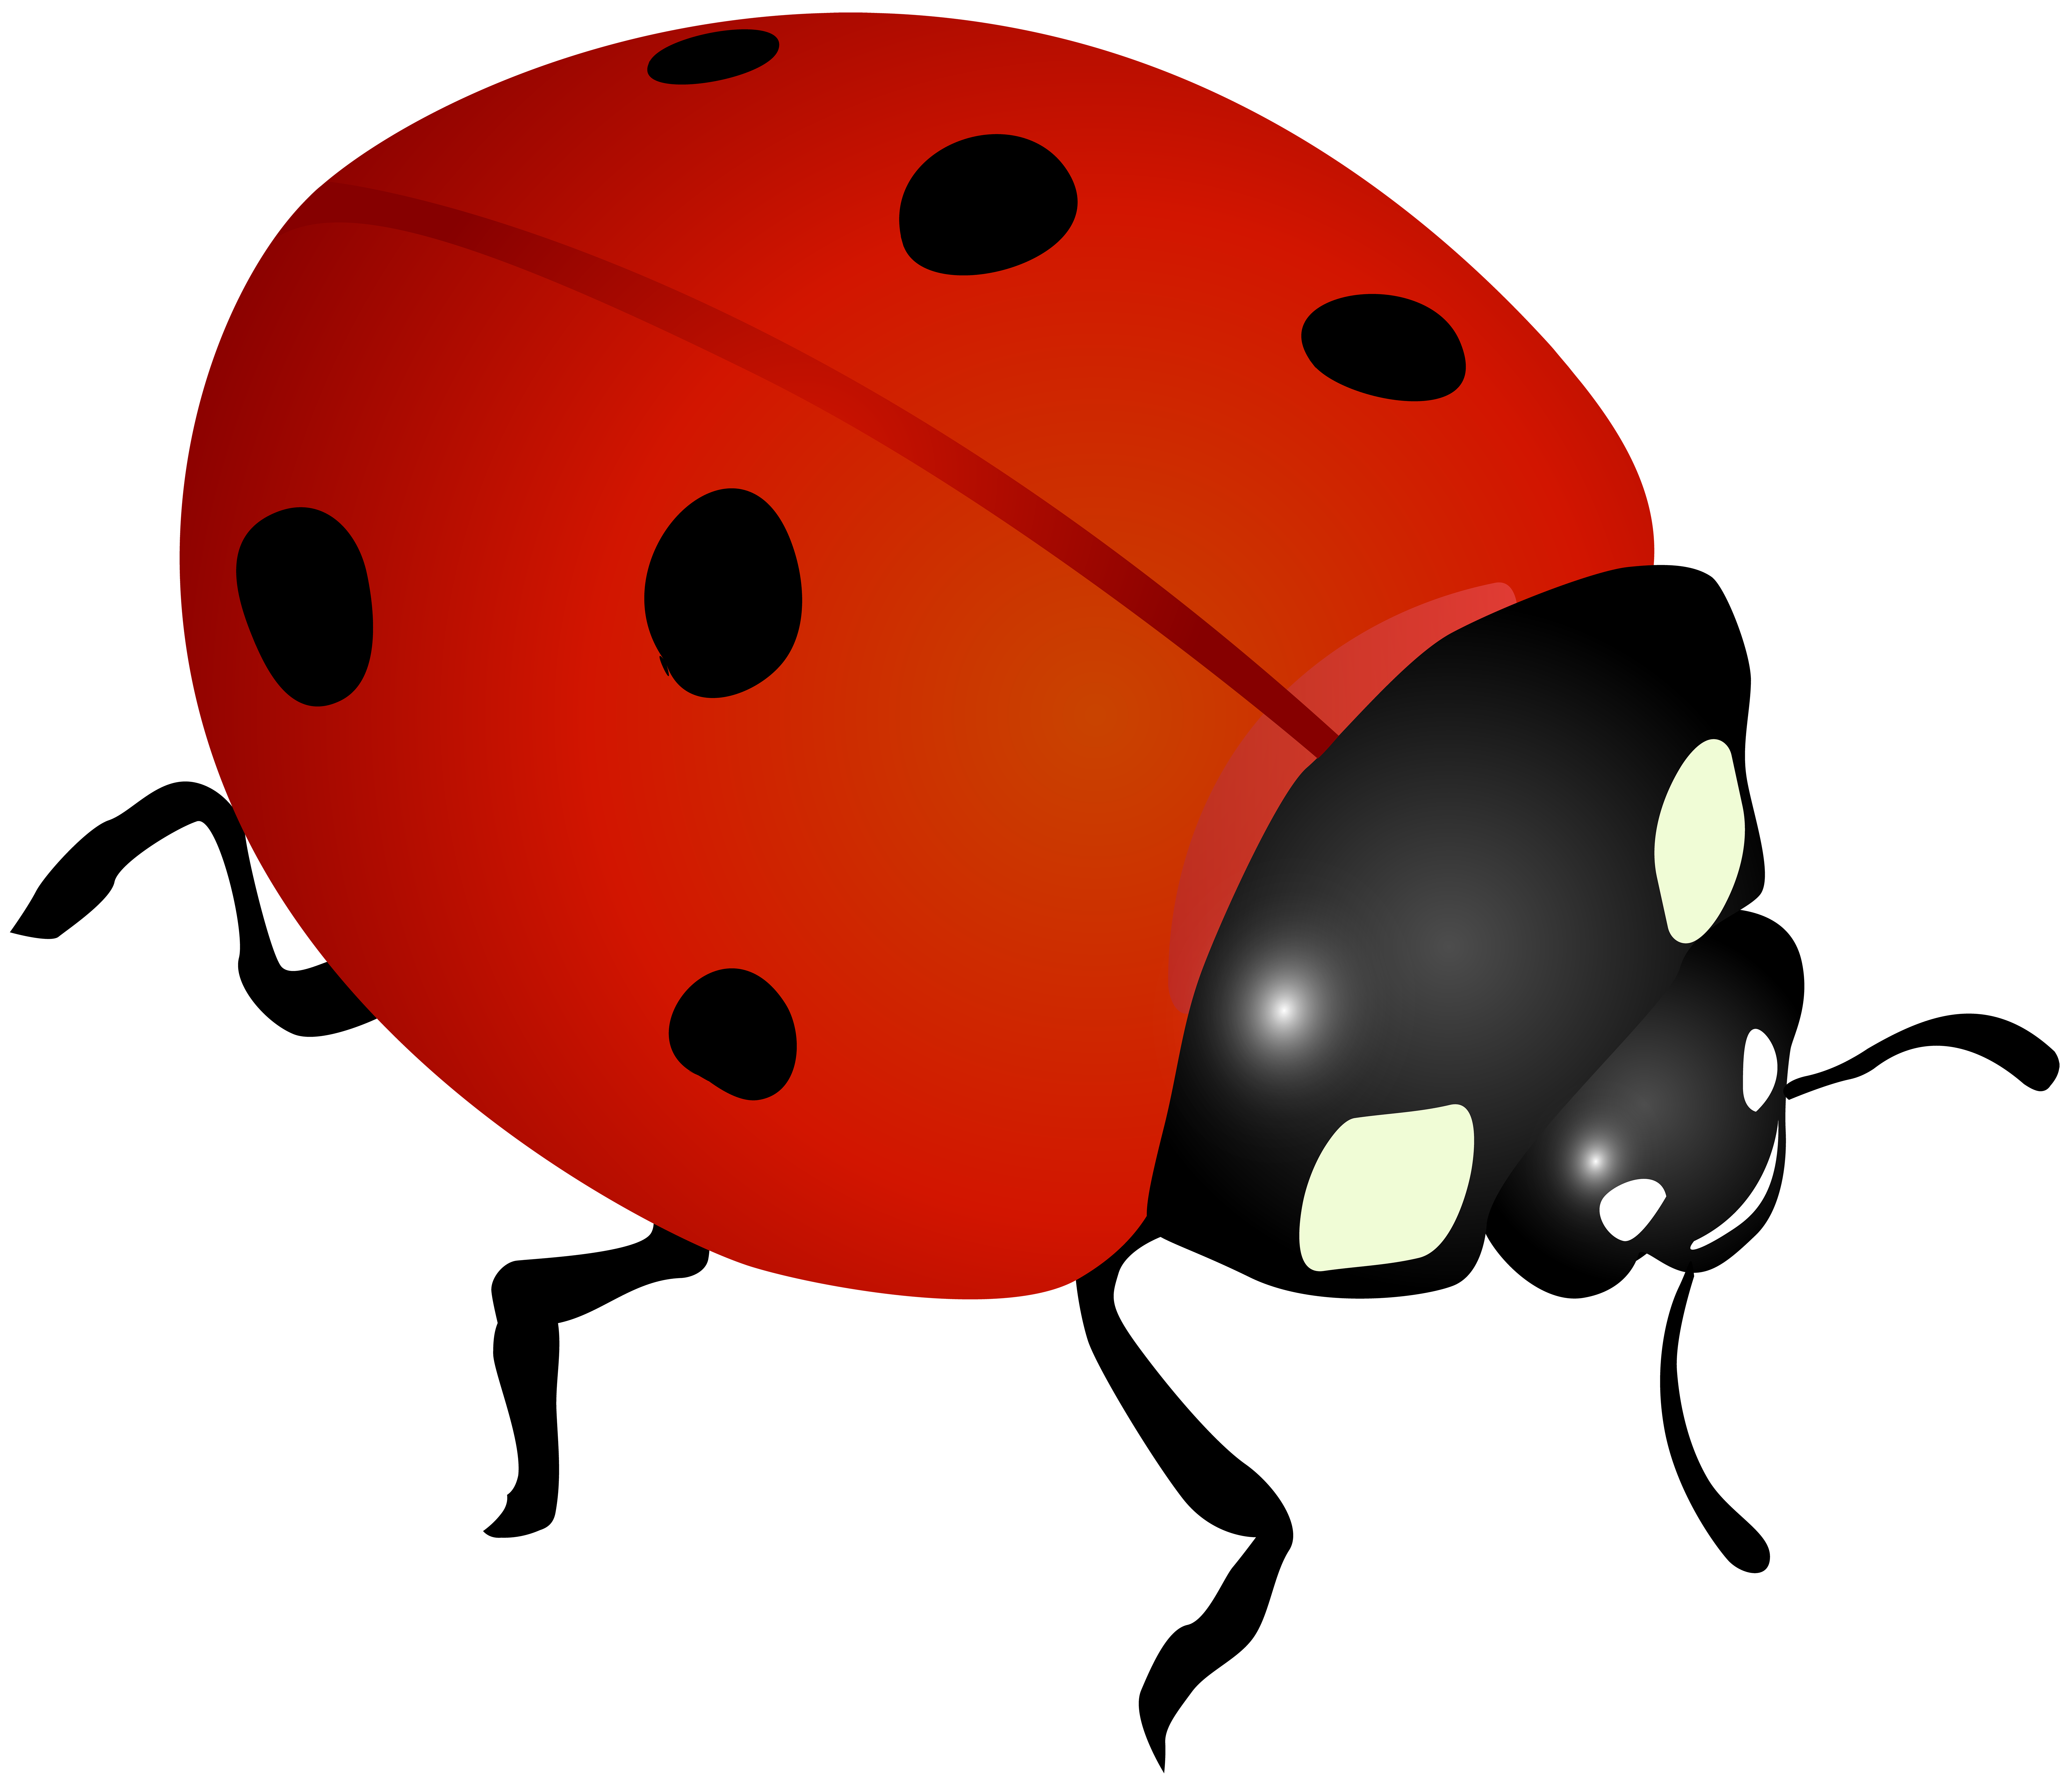 Free Ladybug Cliparts Download Free Ladybug Cliparts Png Images Free